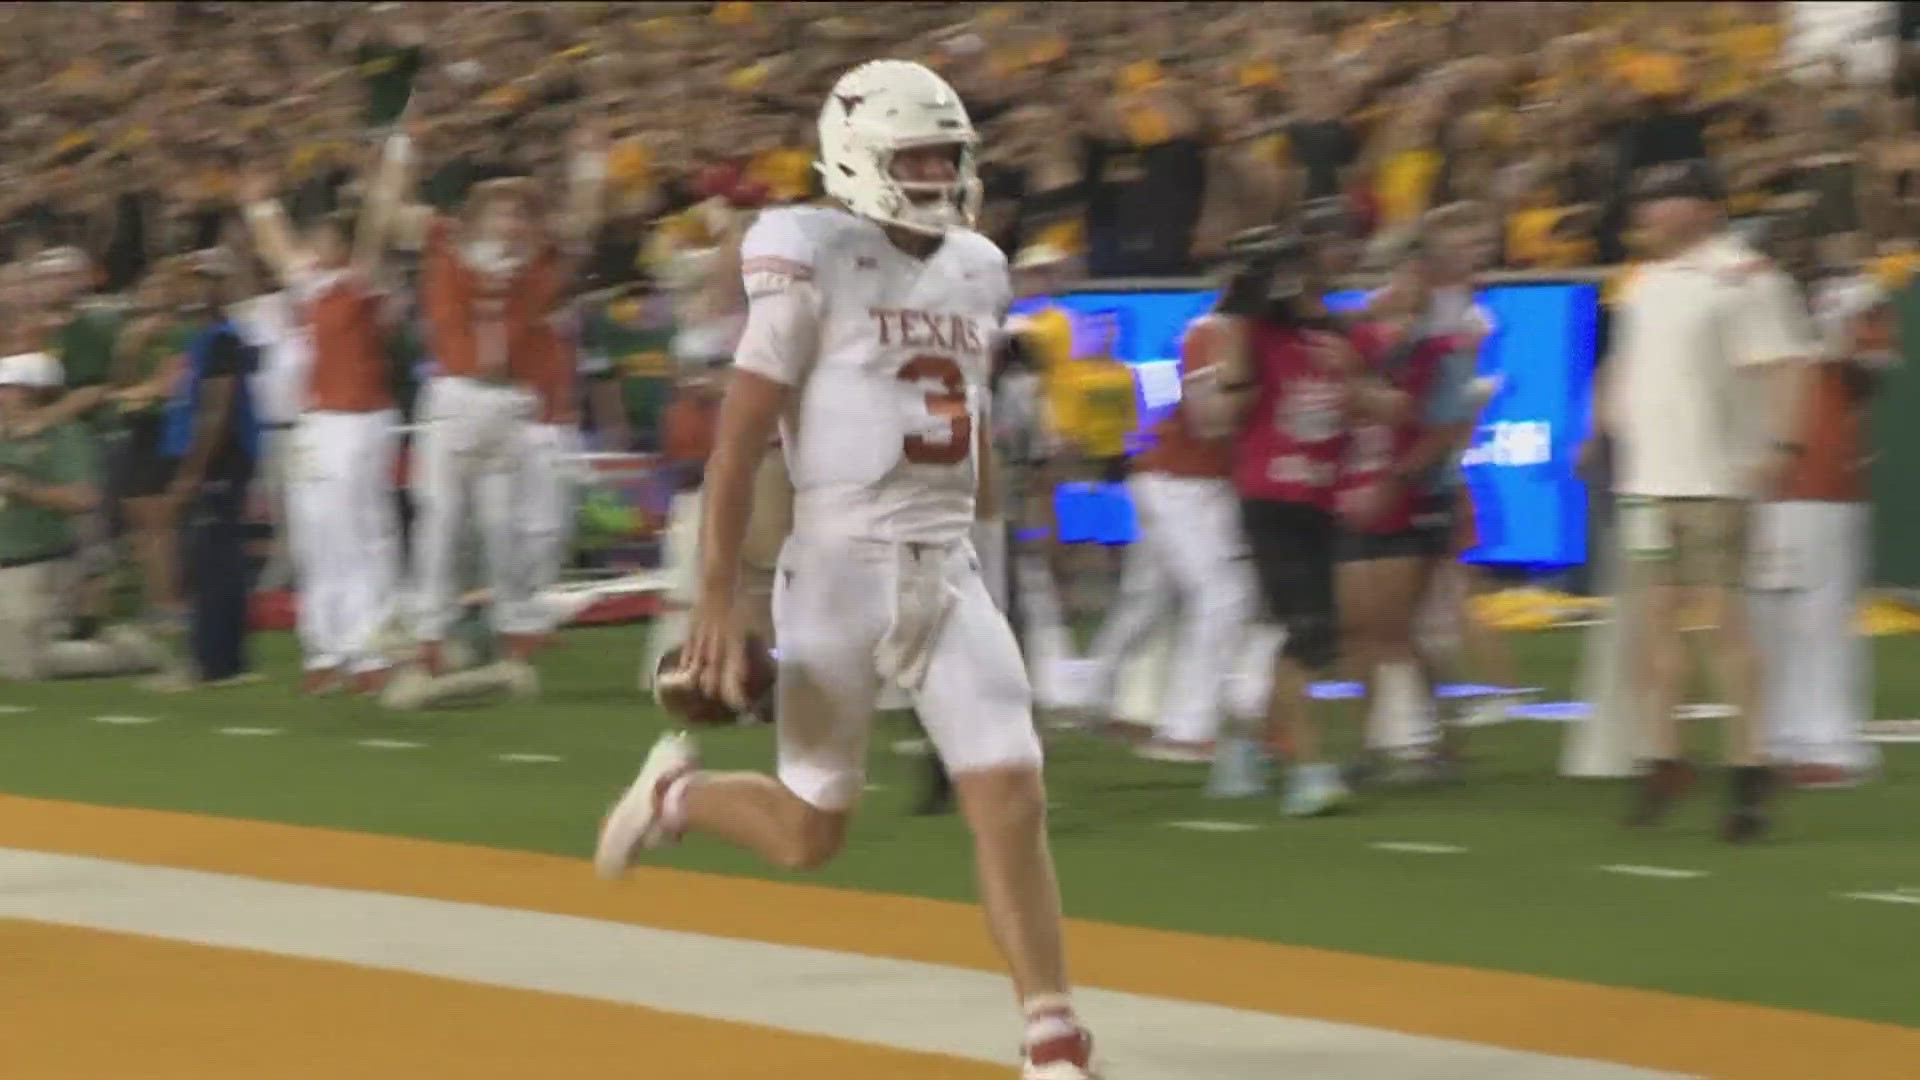 The Longhorns were dominant from the first minute en route to a dismantling of Baylor.